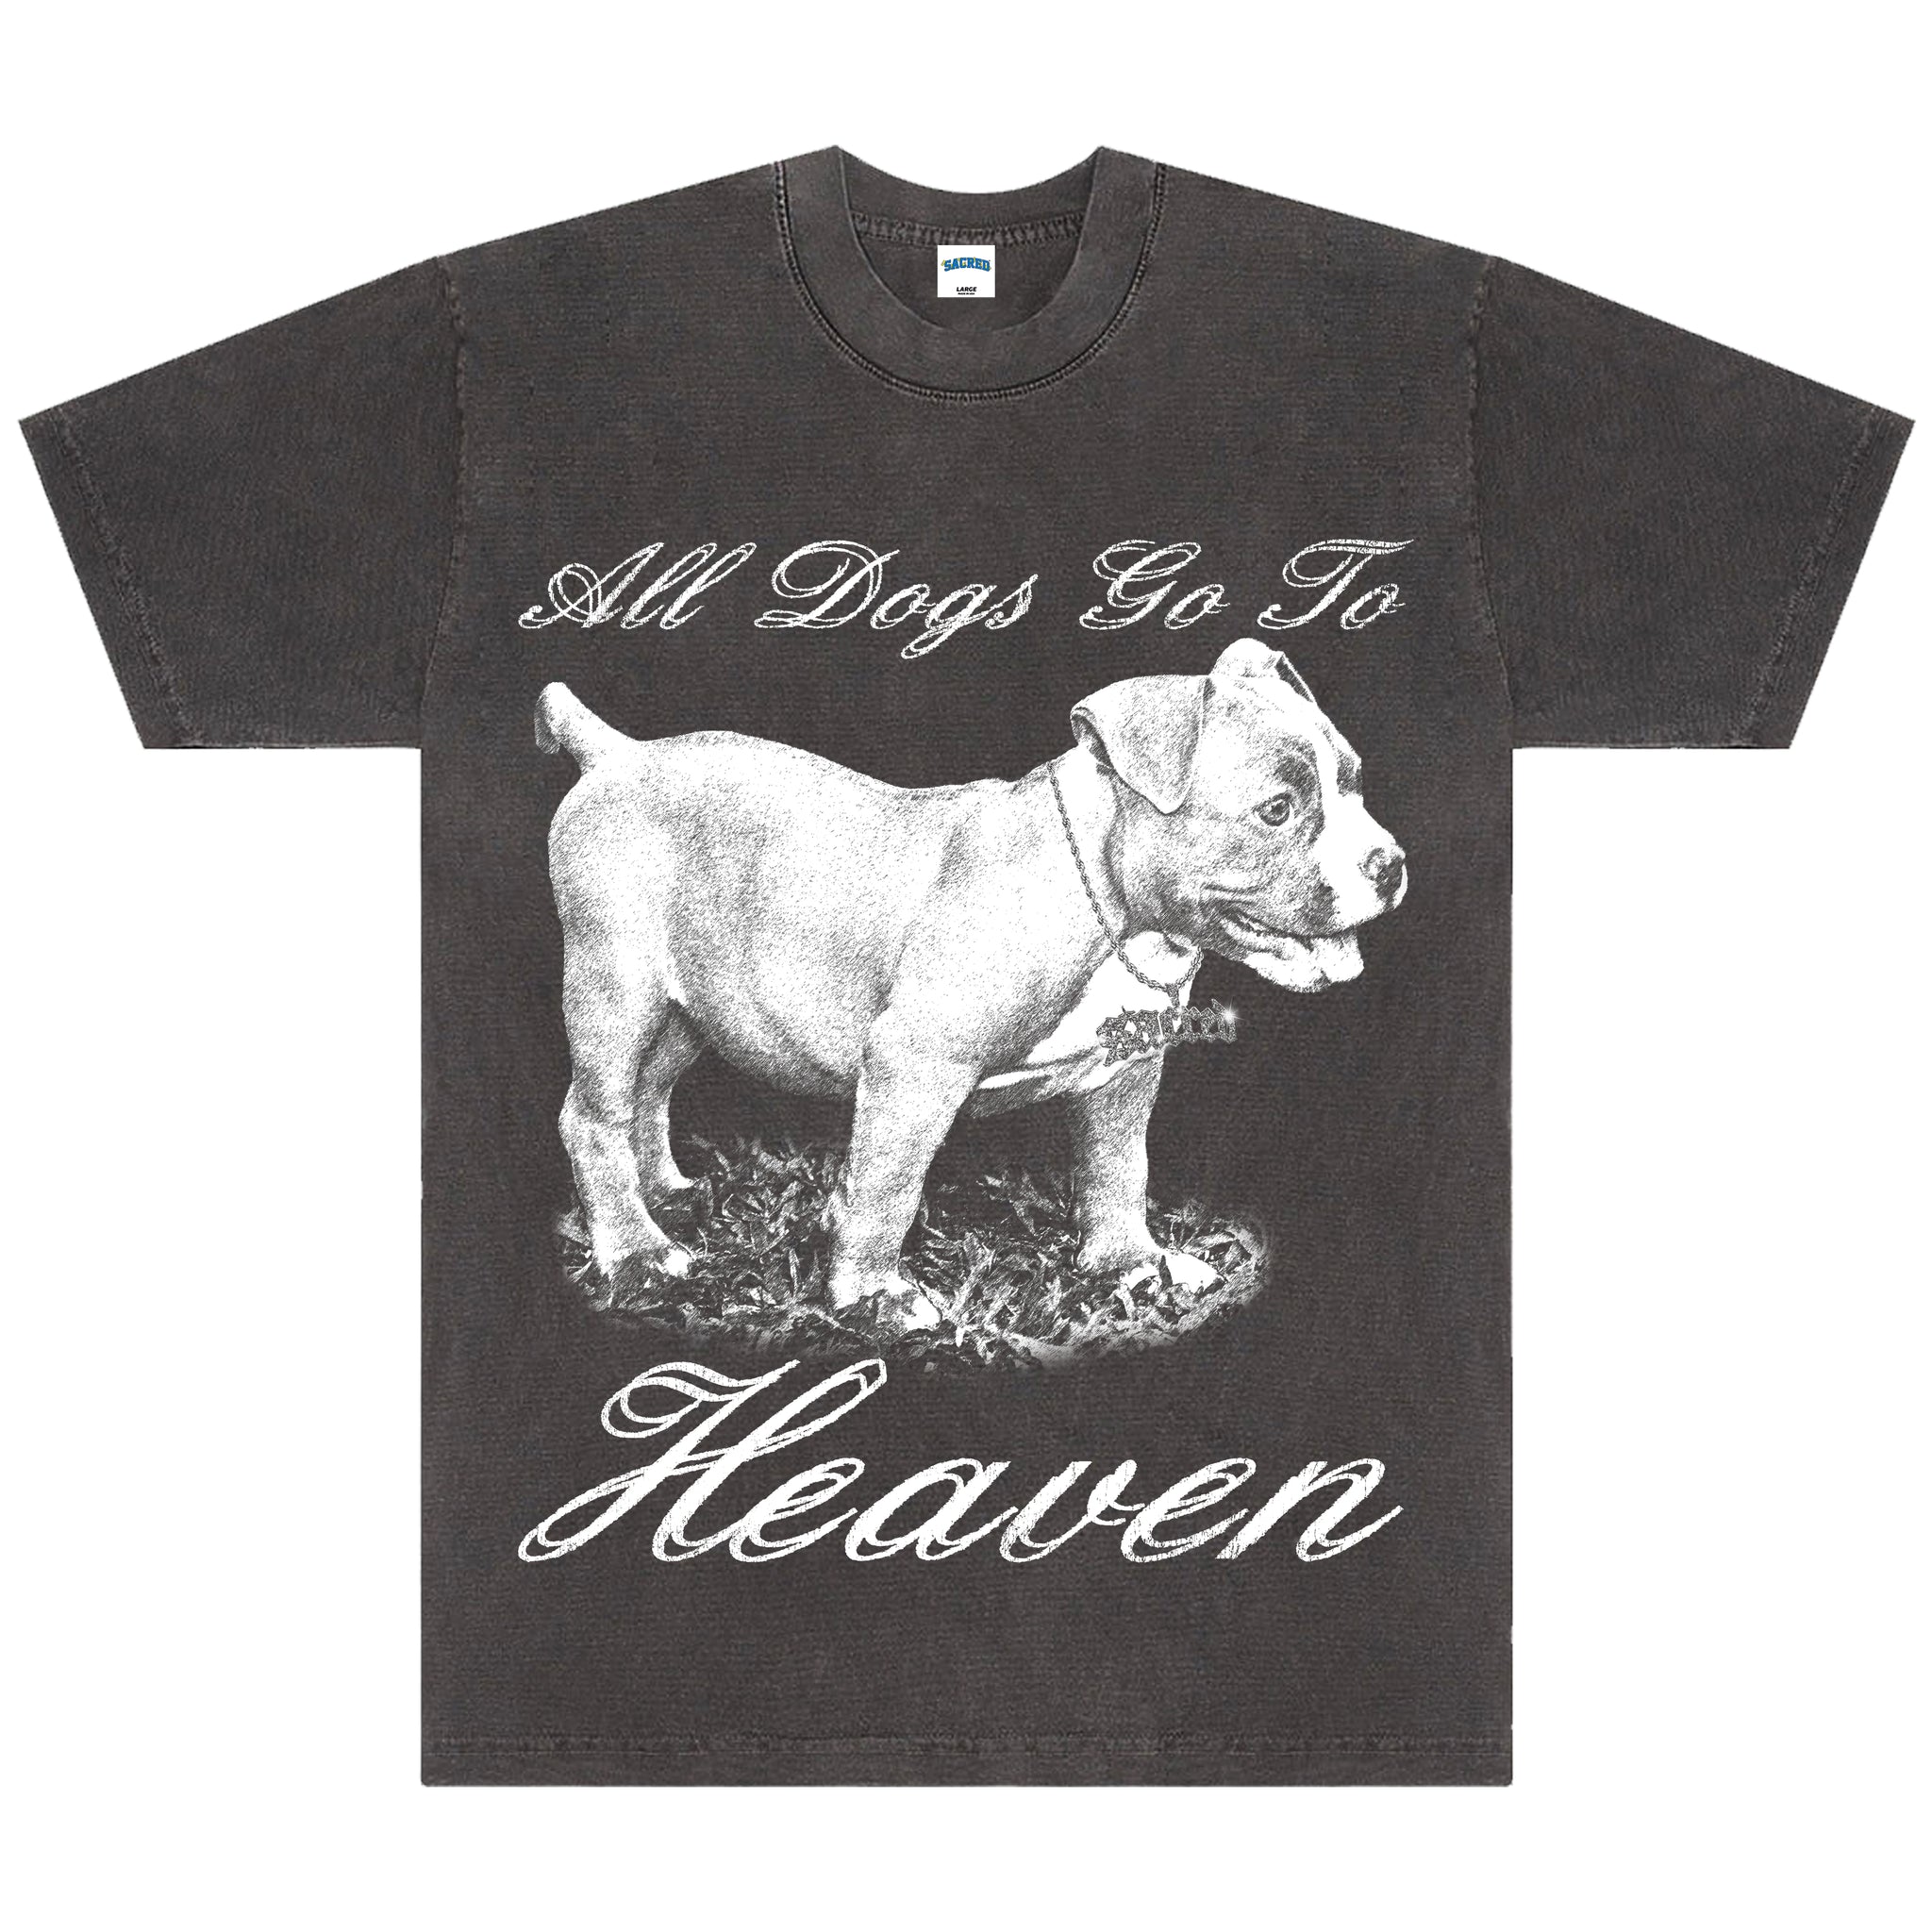 All Dogs Go To Heaven Tee